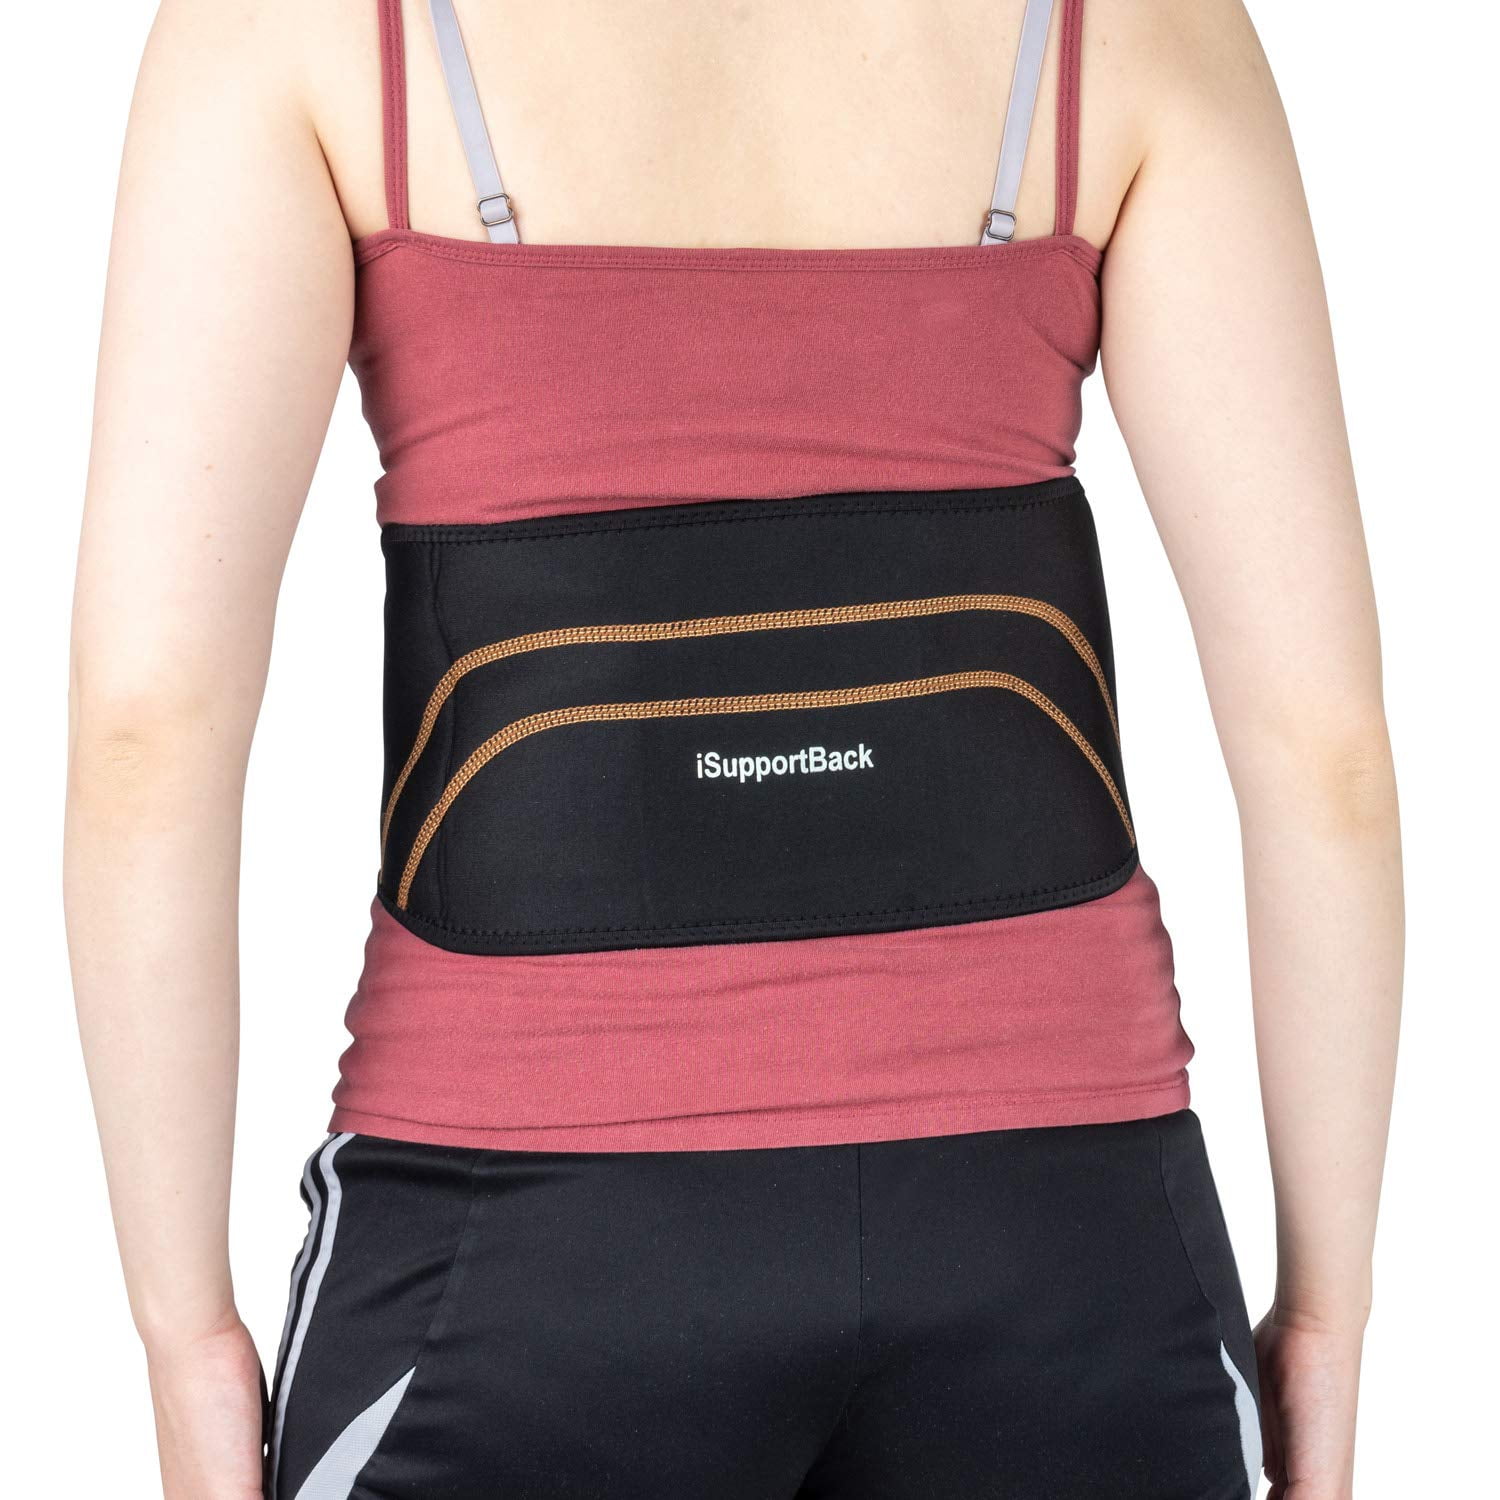 Equate Adjustable Copper Infused Back Support Brace with Extender, Black,  One Size